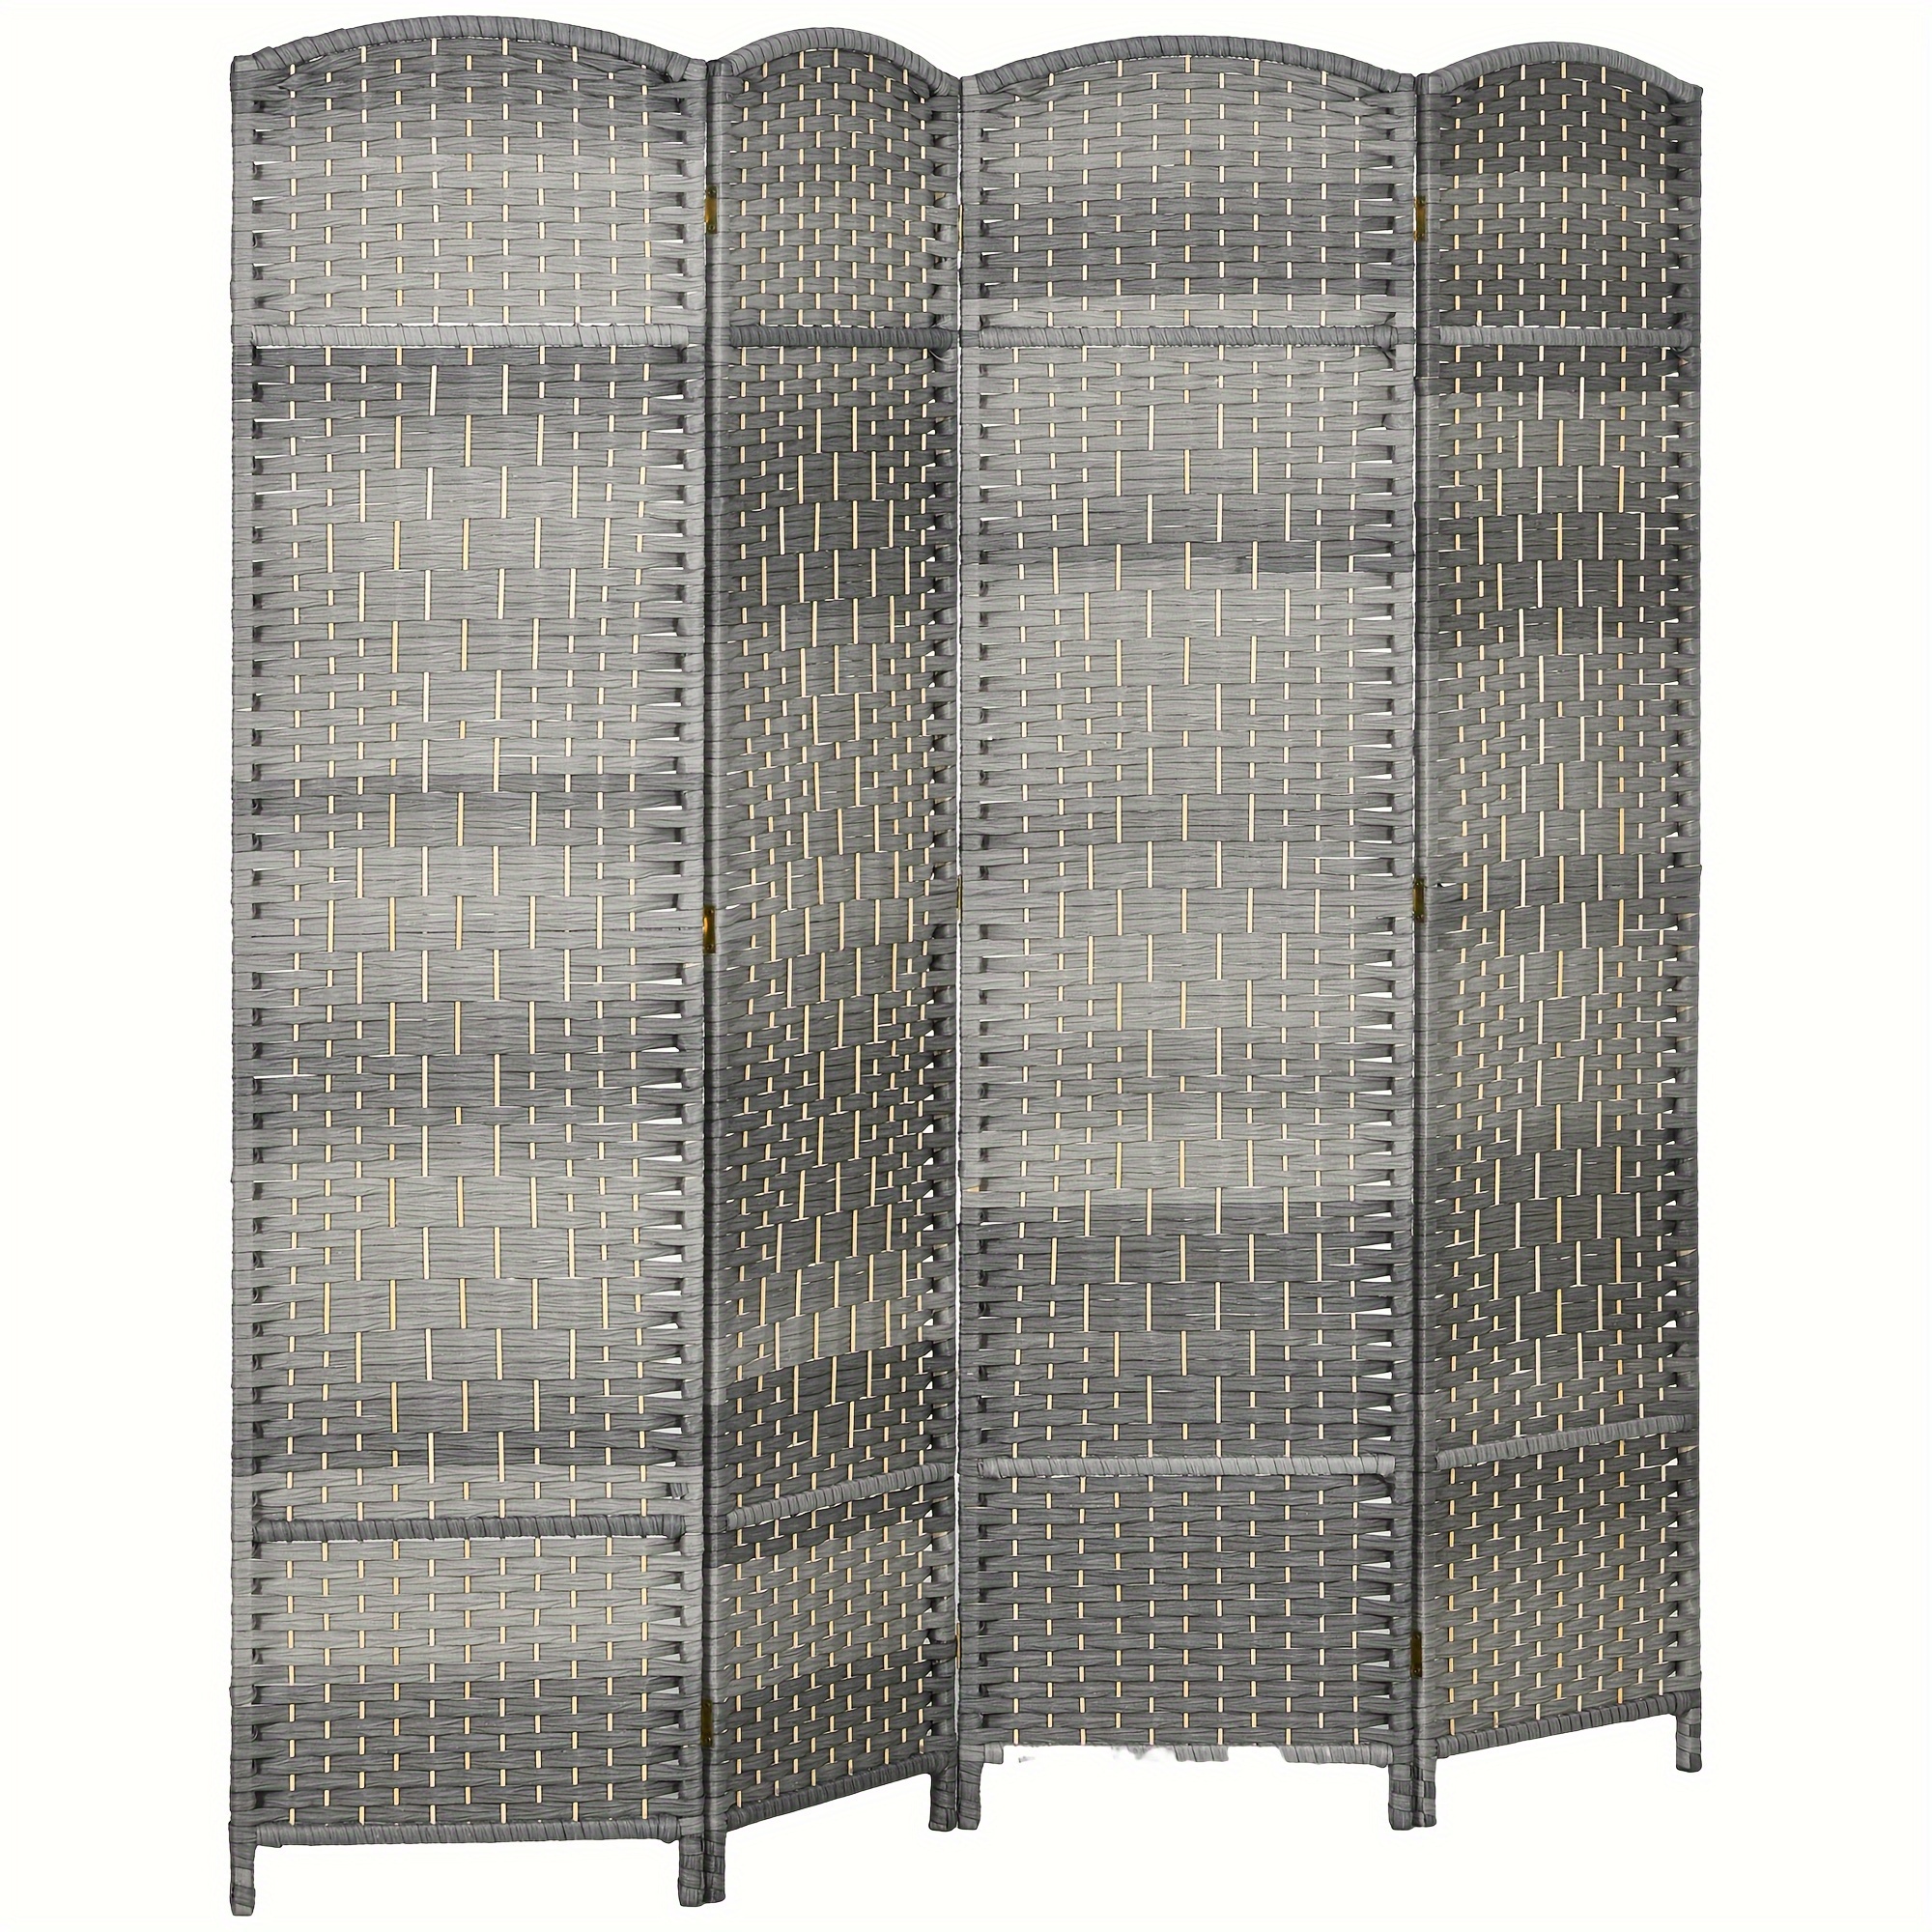 

Homcom 4 Panel Room Divider, 6' Tall Folding Privacy Screen, Hand-woven Freestanding Wood Partition For Home Office, Bedroom, Mixed Gray